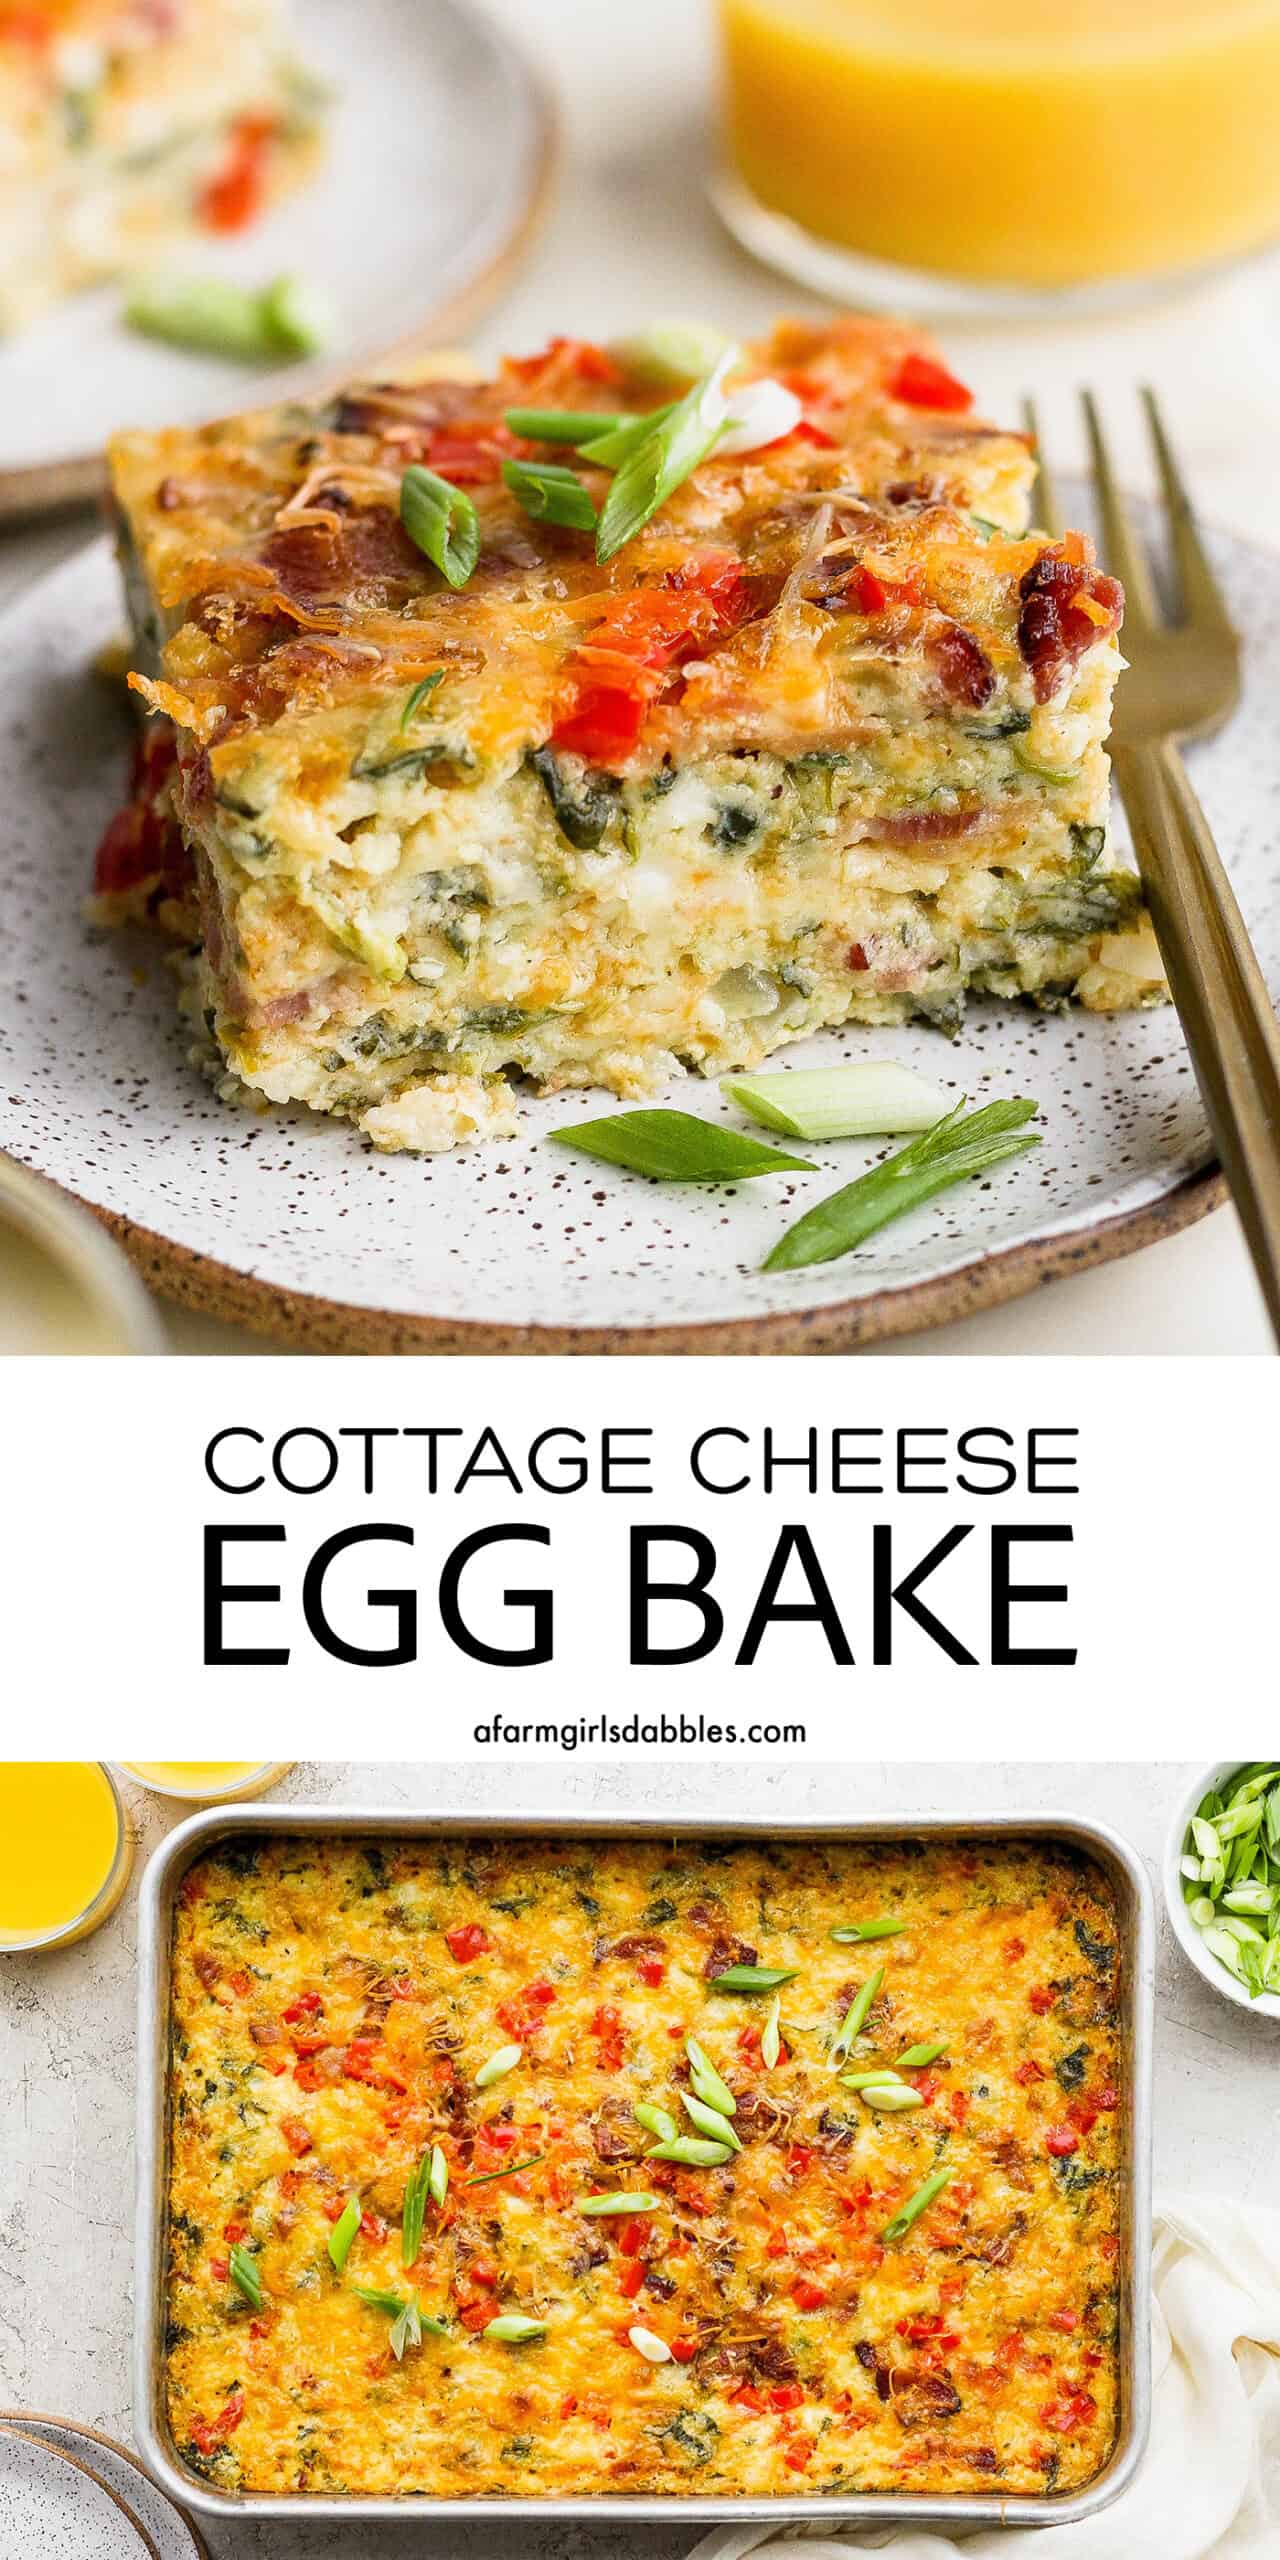 Cottage Cheese Egg Bake (Protein-Packed & Flavorful!)